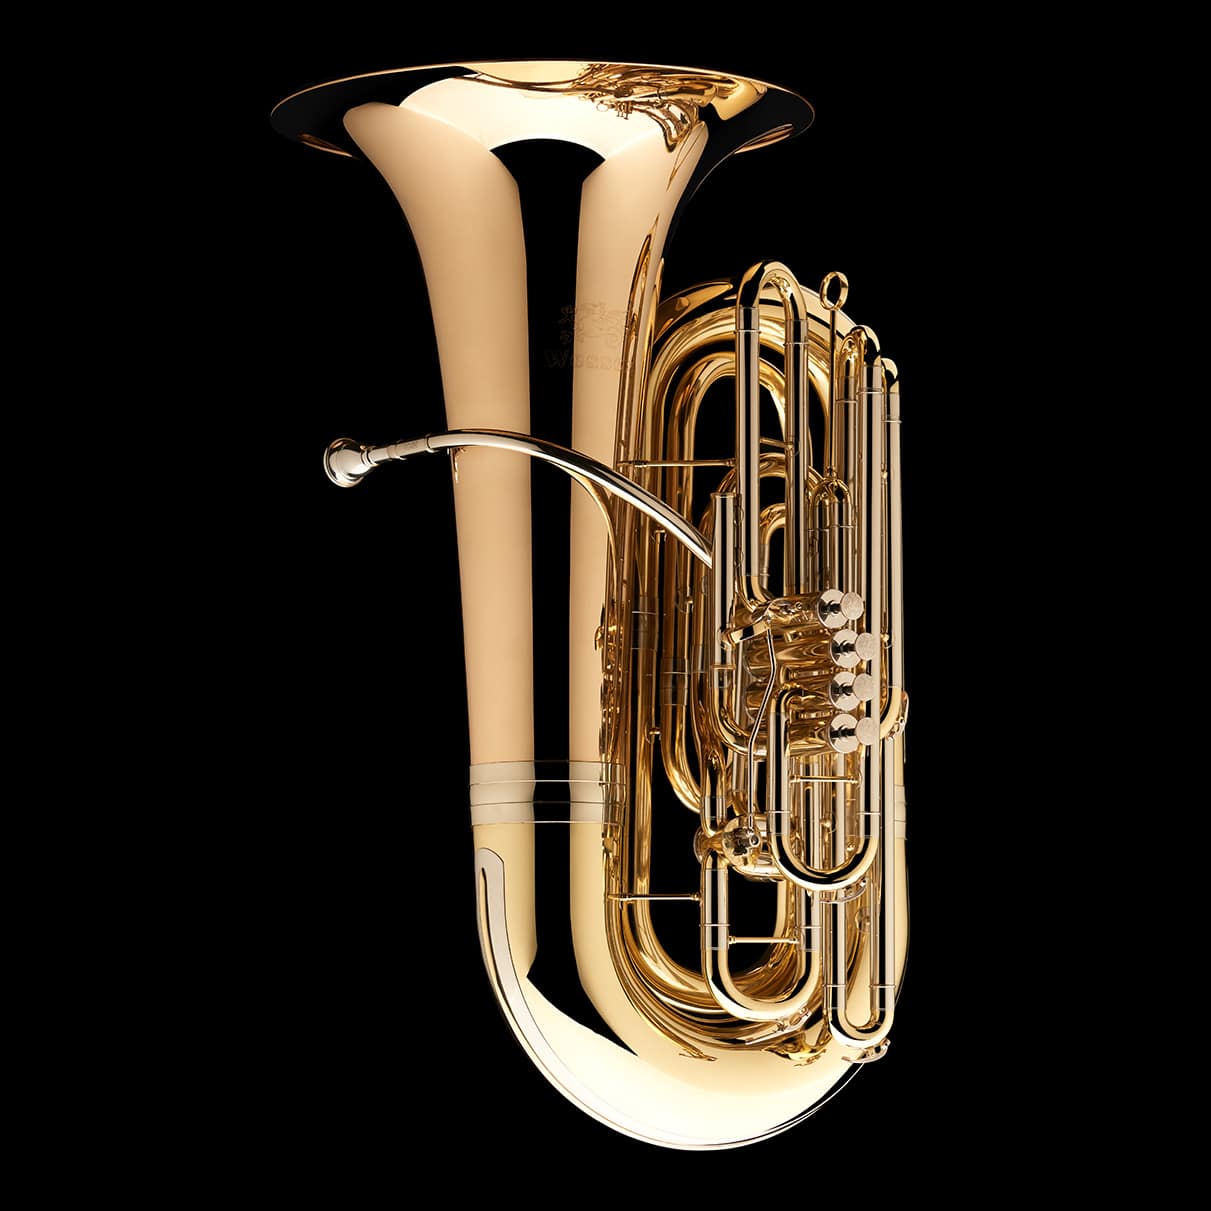 An image of the front of a BBb 4/4 Tuba with 5-valves 'Viverna' from Wessex Tubas